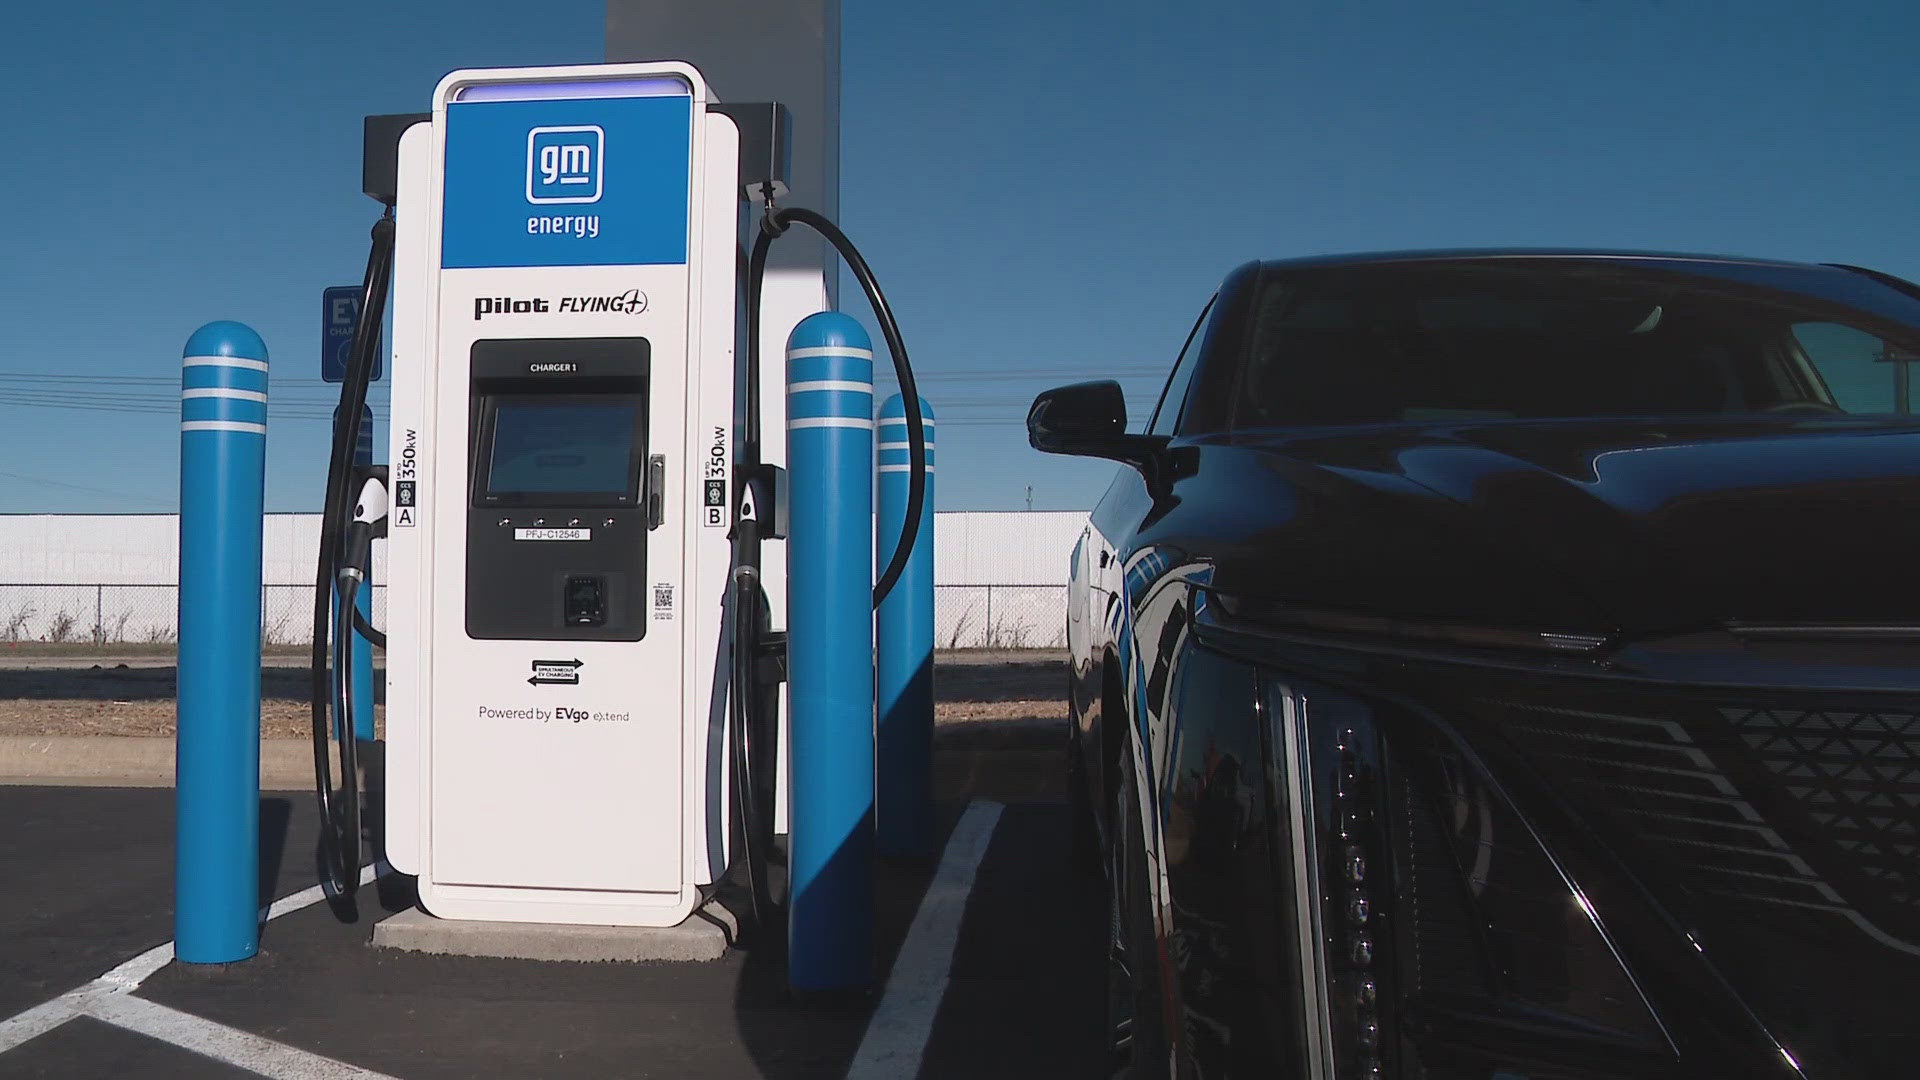 The state of Ohio unveiled the first electric vehicle charger in the country funded through the federal National Electric Vehicle Infrastructure program Wednesday.